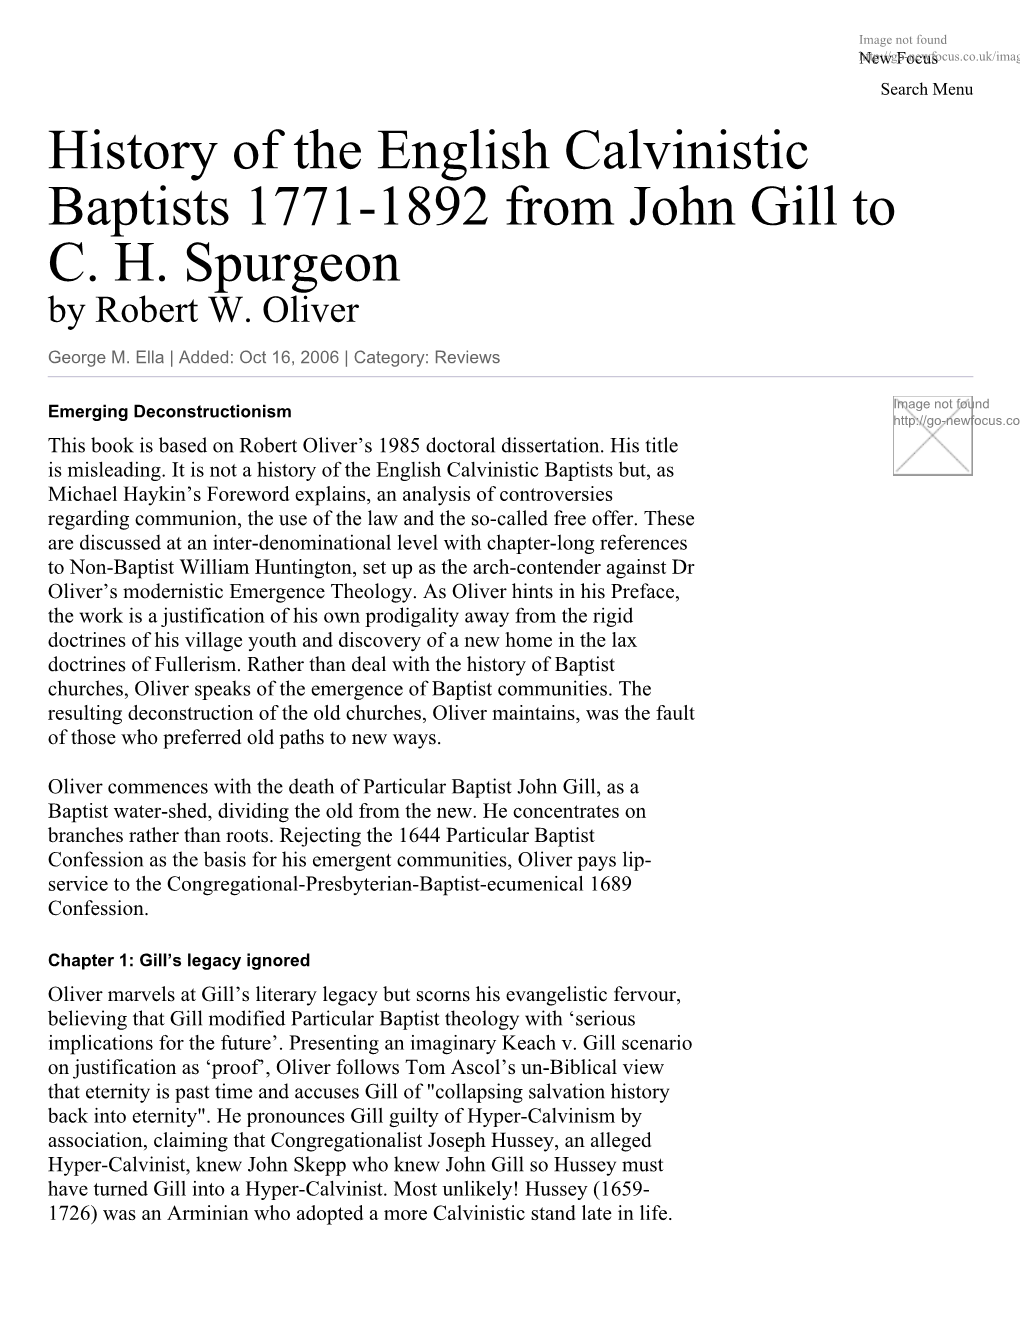 History of the English Calvinistic Baptists 1771-1892 from John Gill to C